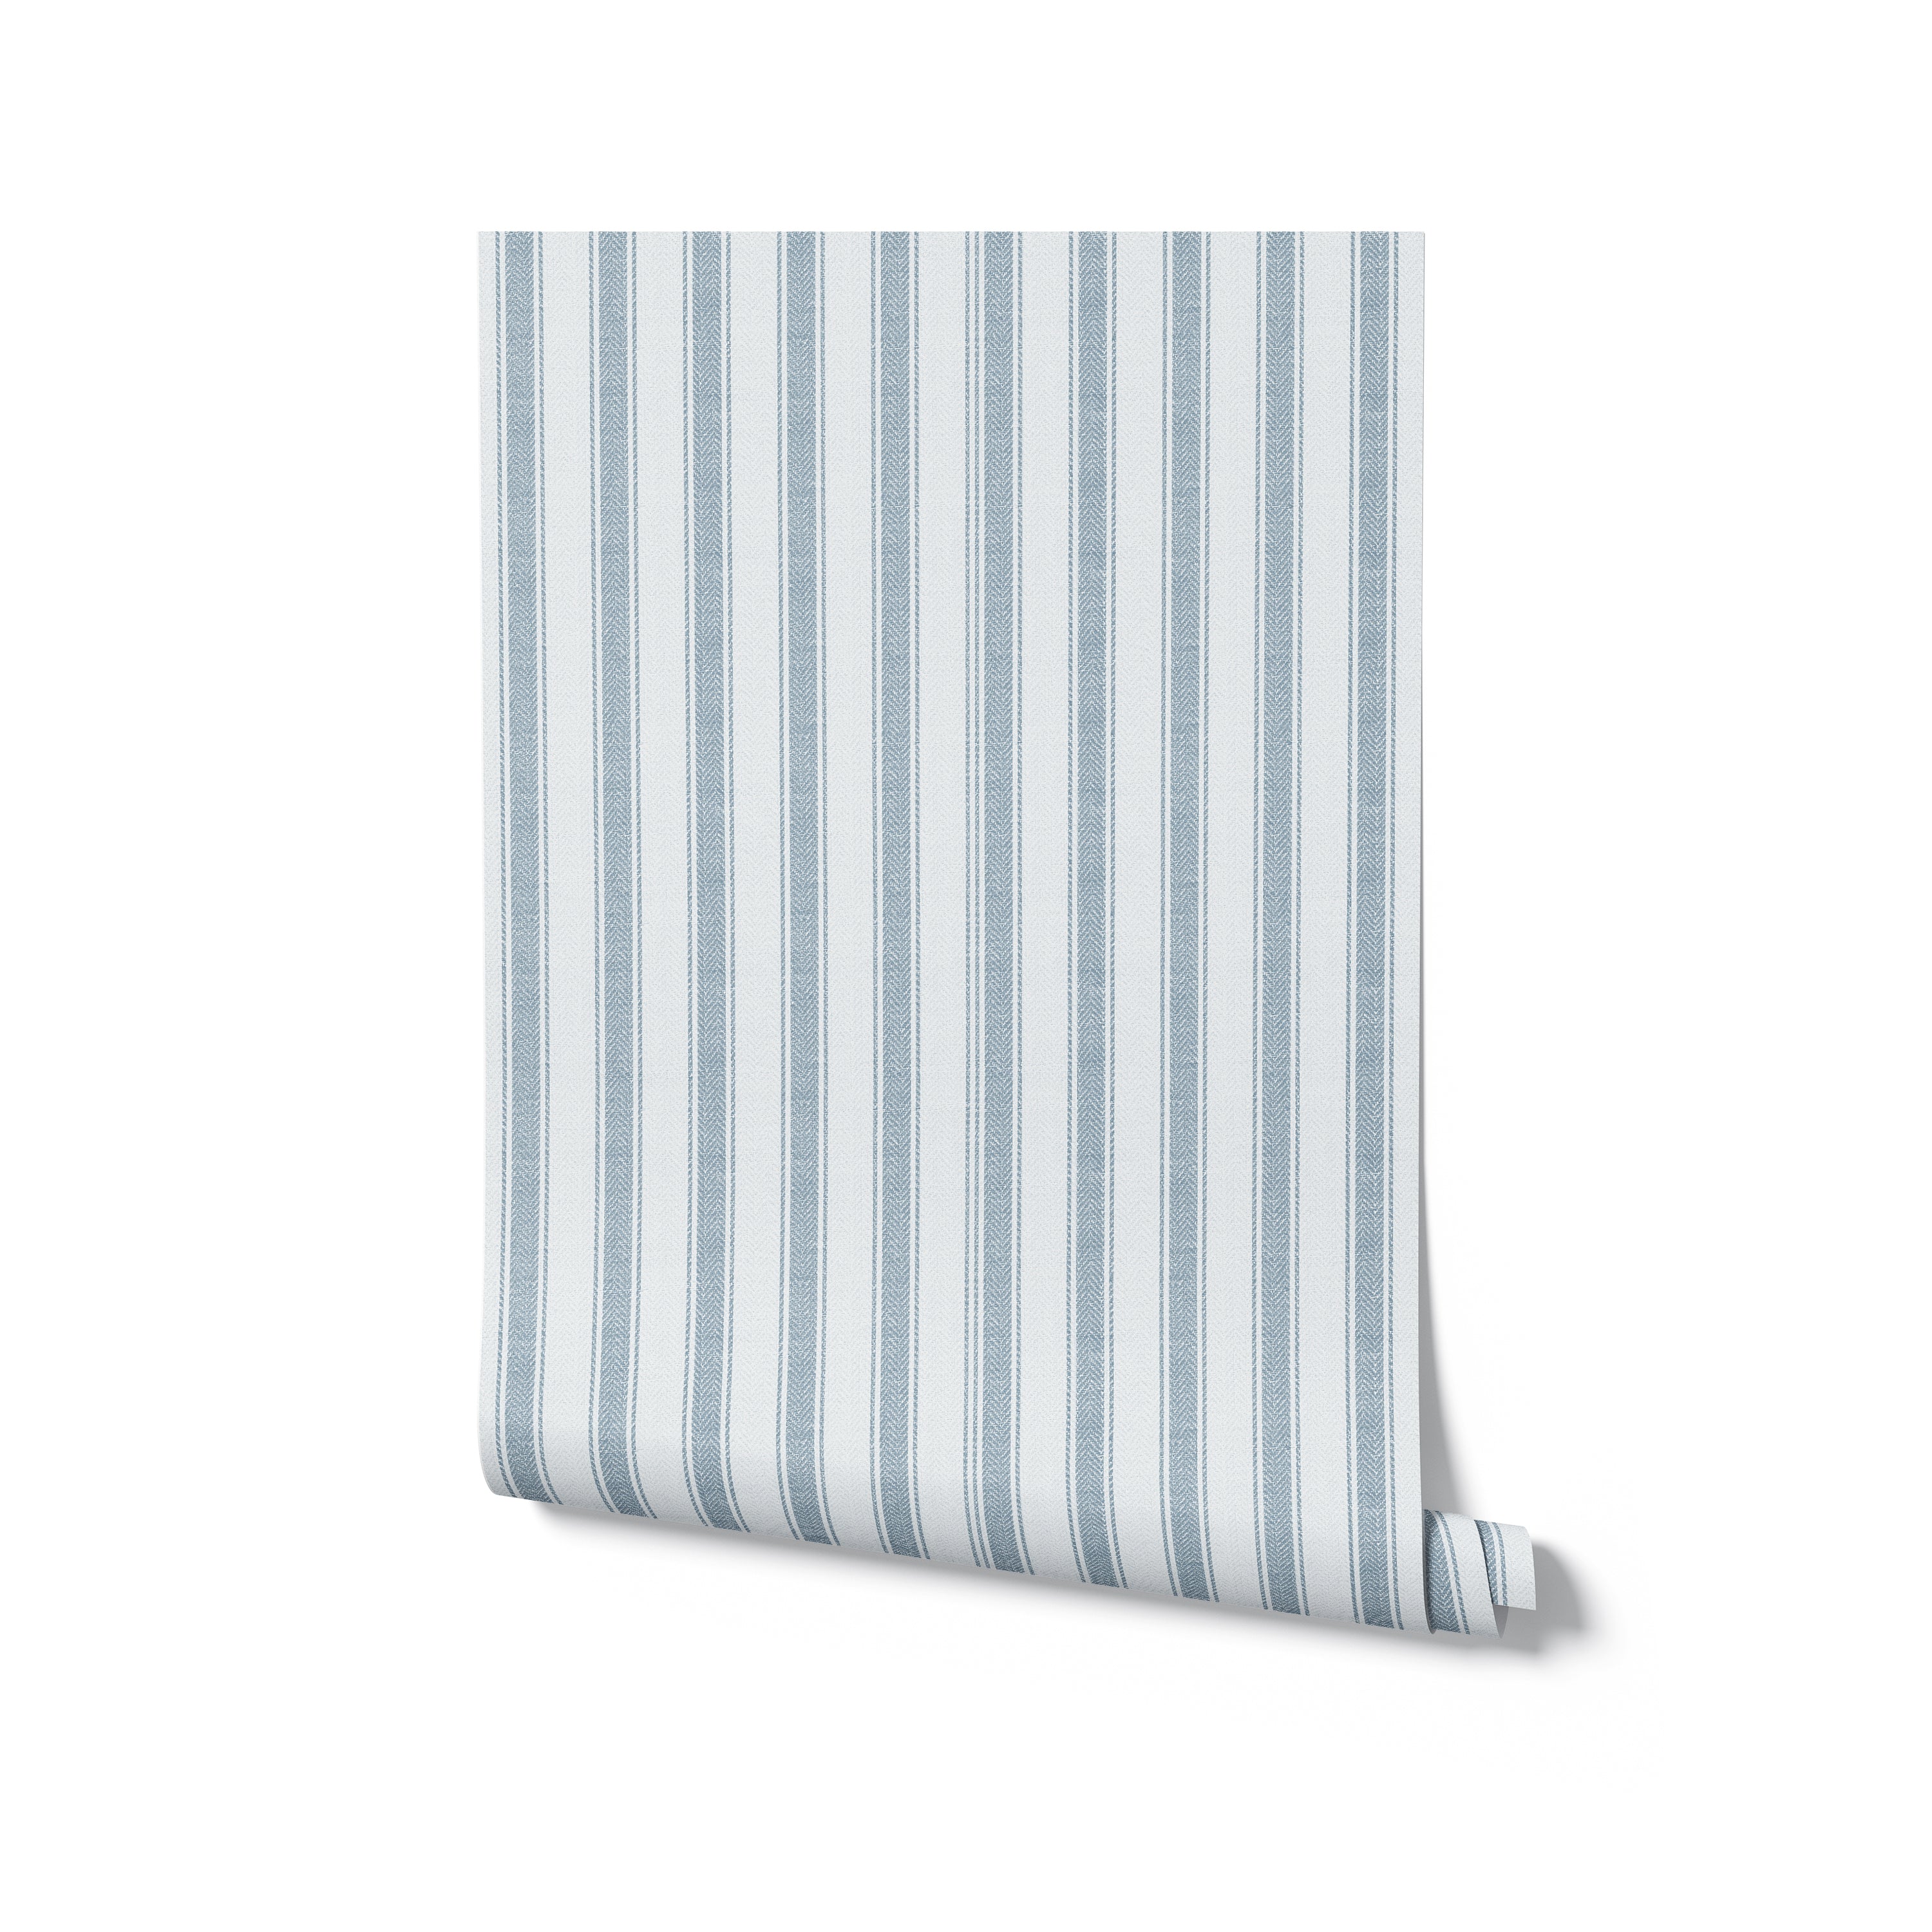 A roll of Striped Fabric Wallpaper presented against a white background, showcasing the gentle tan and cream stripes that offer a sophisticated fabric-like texture, perfect for creating a statement wall or a complete room makeover, pale blue